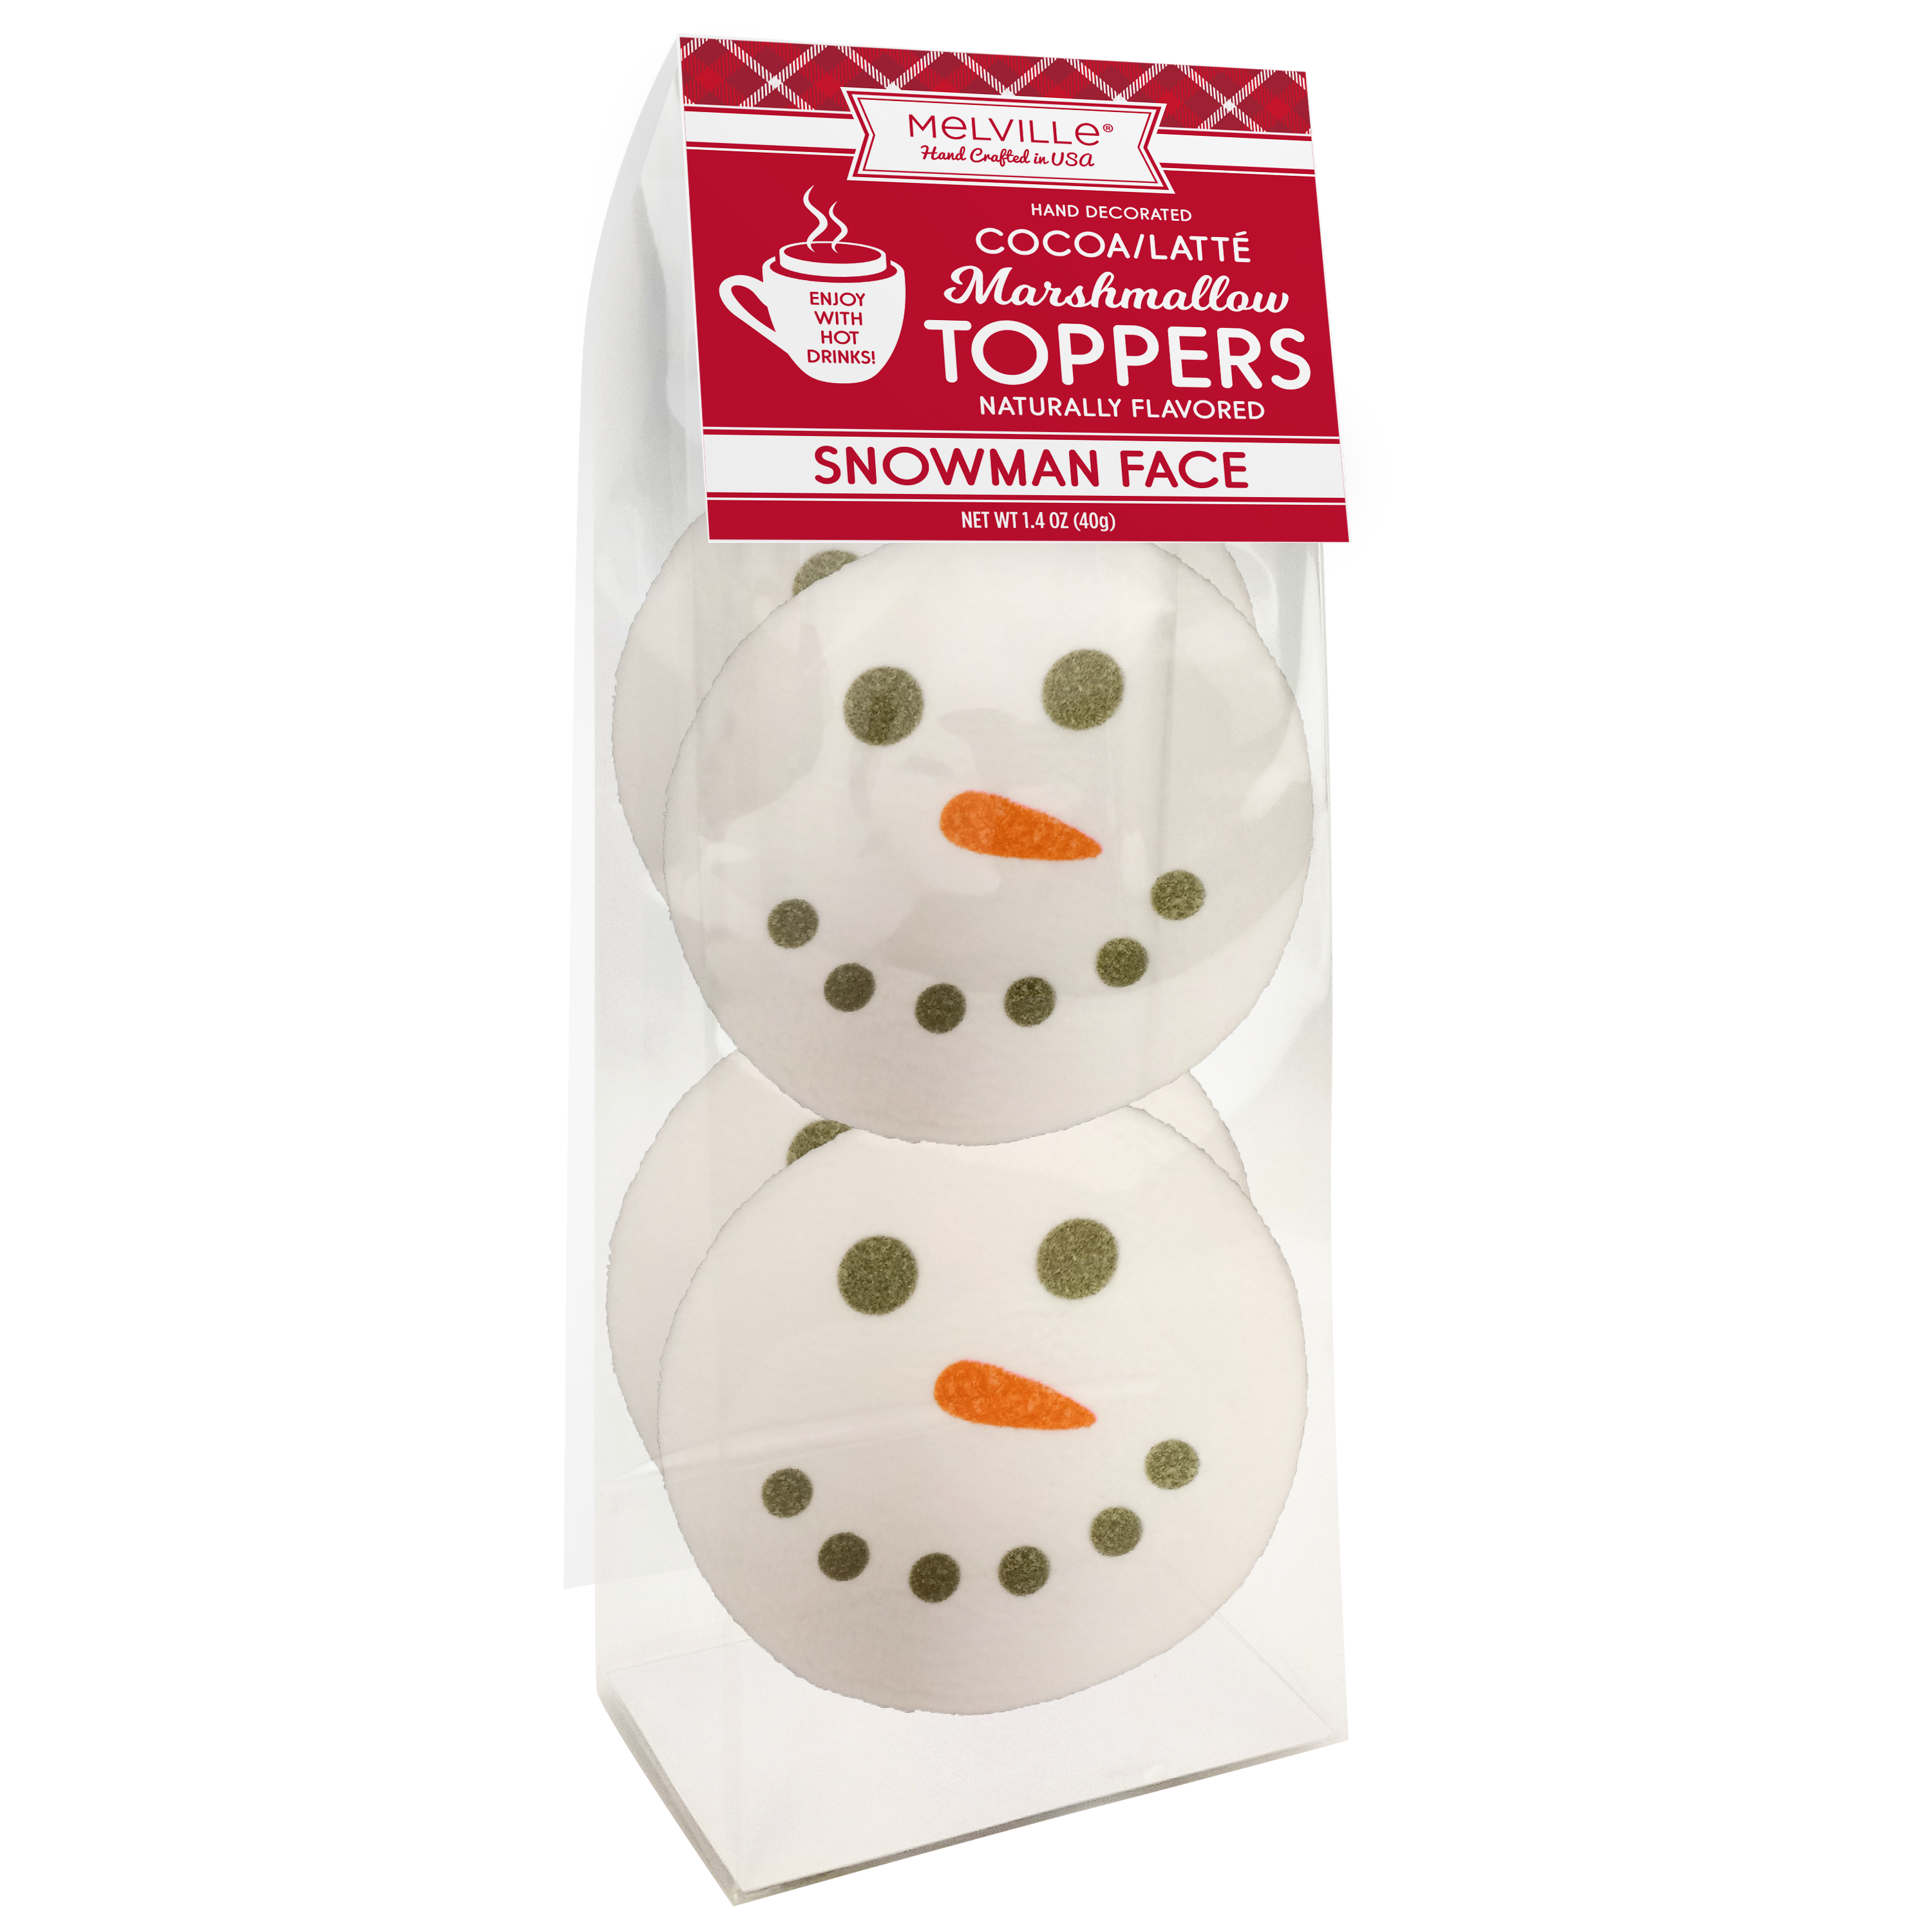 Snowman Face Marshmallow Toppers by Melville Candy Company